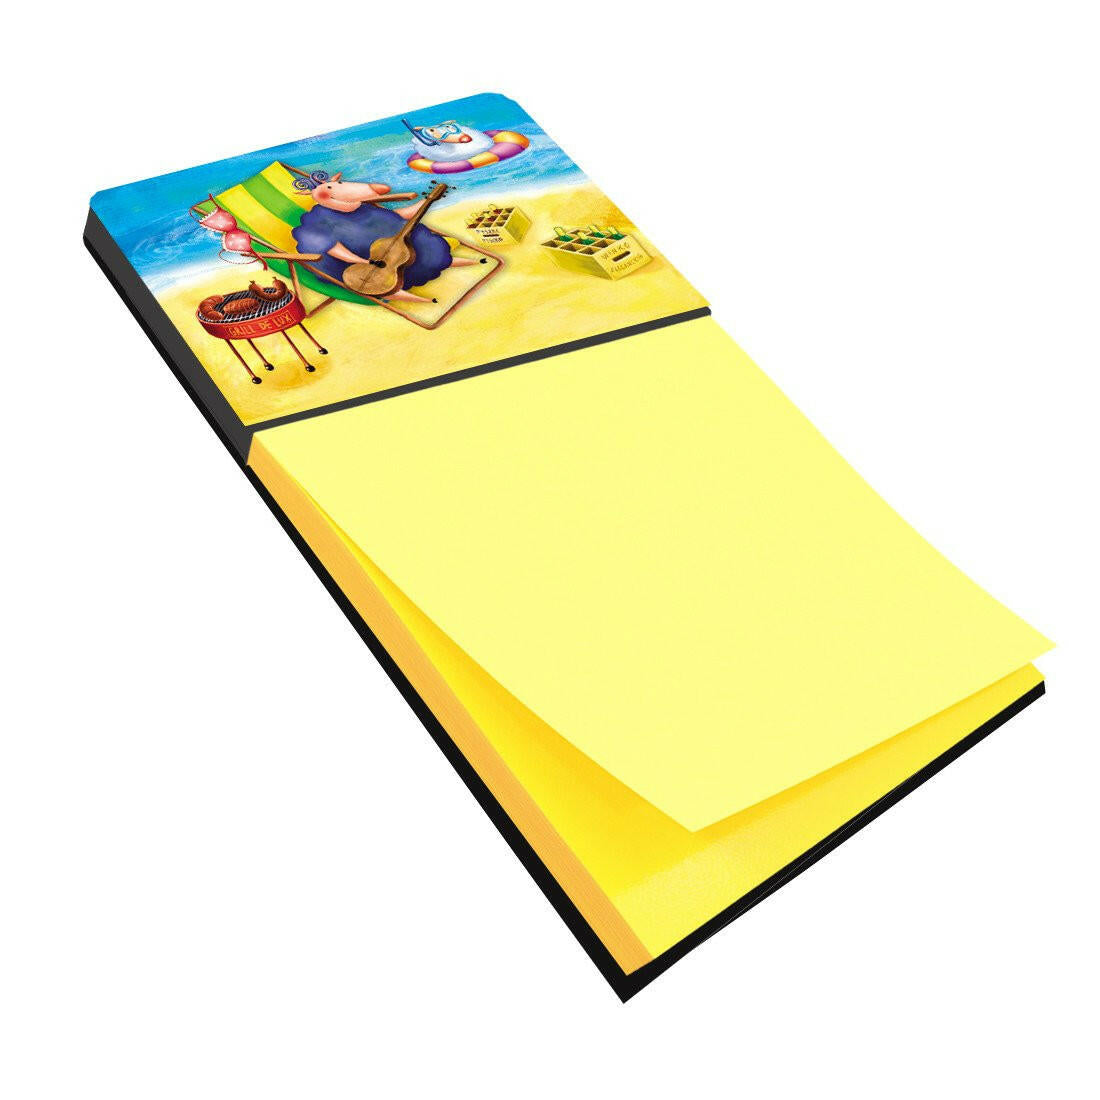 Pig Sunbathing on the Beach Sticky Note Holder APH0079SN by Caroline's Treasures